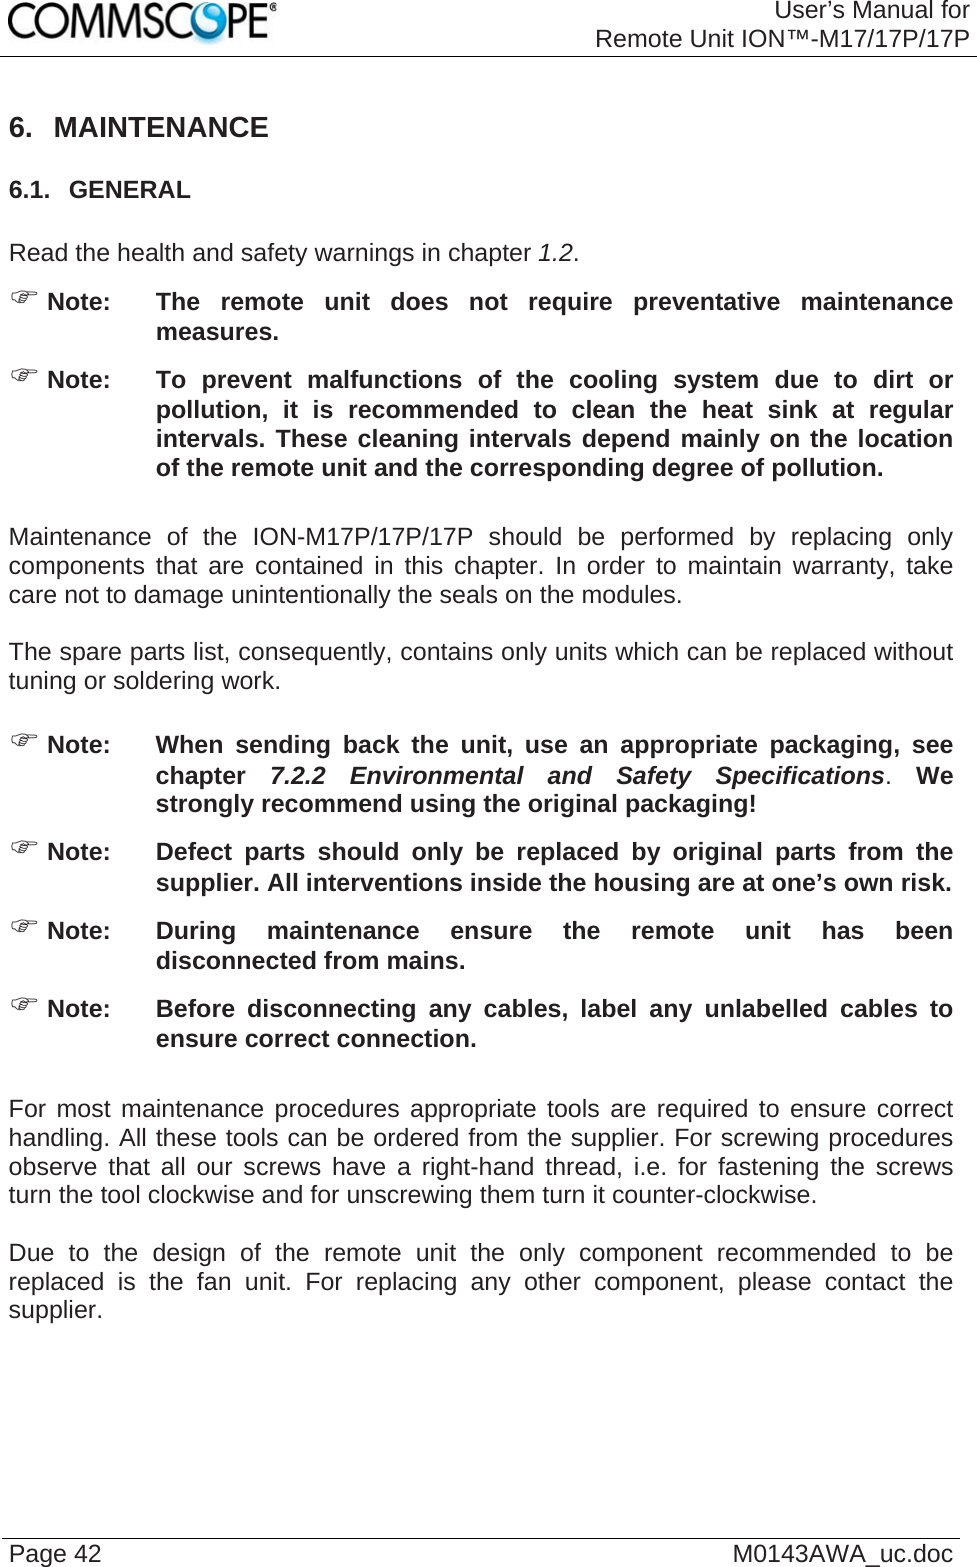 User’s Manual forRemote Unit ION™-M17/17P/17P Page 42  M0143AWA_uc.doc 6. MAINTENANCE 6.1.  GENERAL  Read the health and safety warnings in chapter 1.2. ) Note:  The remote unit does not require preventative maintenance measures. ) Note:  To prevent malfunctions of the cooling system due to dirt or pollution, it is recommended to clean the heat sink at regular intervals. These cleaning intervals depend mainly on the location of the remote unit and the corresponding degree of pollution.  Maintenance of the ION-M17P/17P/17P should be performed by replacing only components that are contained in this chapter. In order to maintain warranty, take care not to damage unintentionally the seals on the modules.  The spare parts list, consequently, contains only units which can be replaced without tuning or soldering work.  ) Note:  When sending back the unit, use an appropriate packaging, see chapter  7.2.2 Environmental and Safety Specifications. We strongly recommend using the original packaging! ) Note:  Defect parts should only be replaced by original parts from the supplier. All interventions inside the housing are at one’s own risk. ) Note:  During maintenance ensure the remote unit has been disconnected from mains. ) Note:  Before disconnecting any cables, label any unlabelled cables to ensure correct connection.  For most maintenance procedures appropriate tools are required to ensure correct handling. All these tools can be ordered from the supplier. For screwing procedures observe that all our screws have a right-hand thread, i.e. for fastening the screws turn the tool clockwise and for unscrewing them turn it counter-clockwise.  Due to the design of the remote unit the only component recommended to be replaced is the fan unit. For replacing any other component, please contact the supplier.  